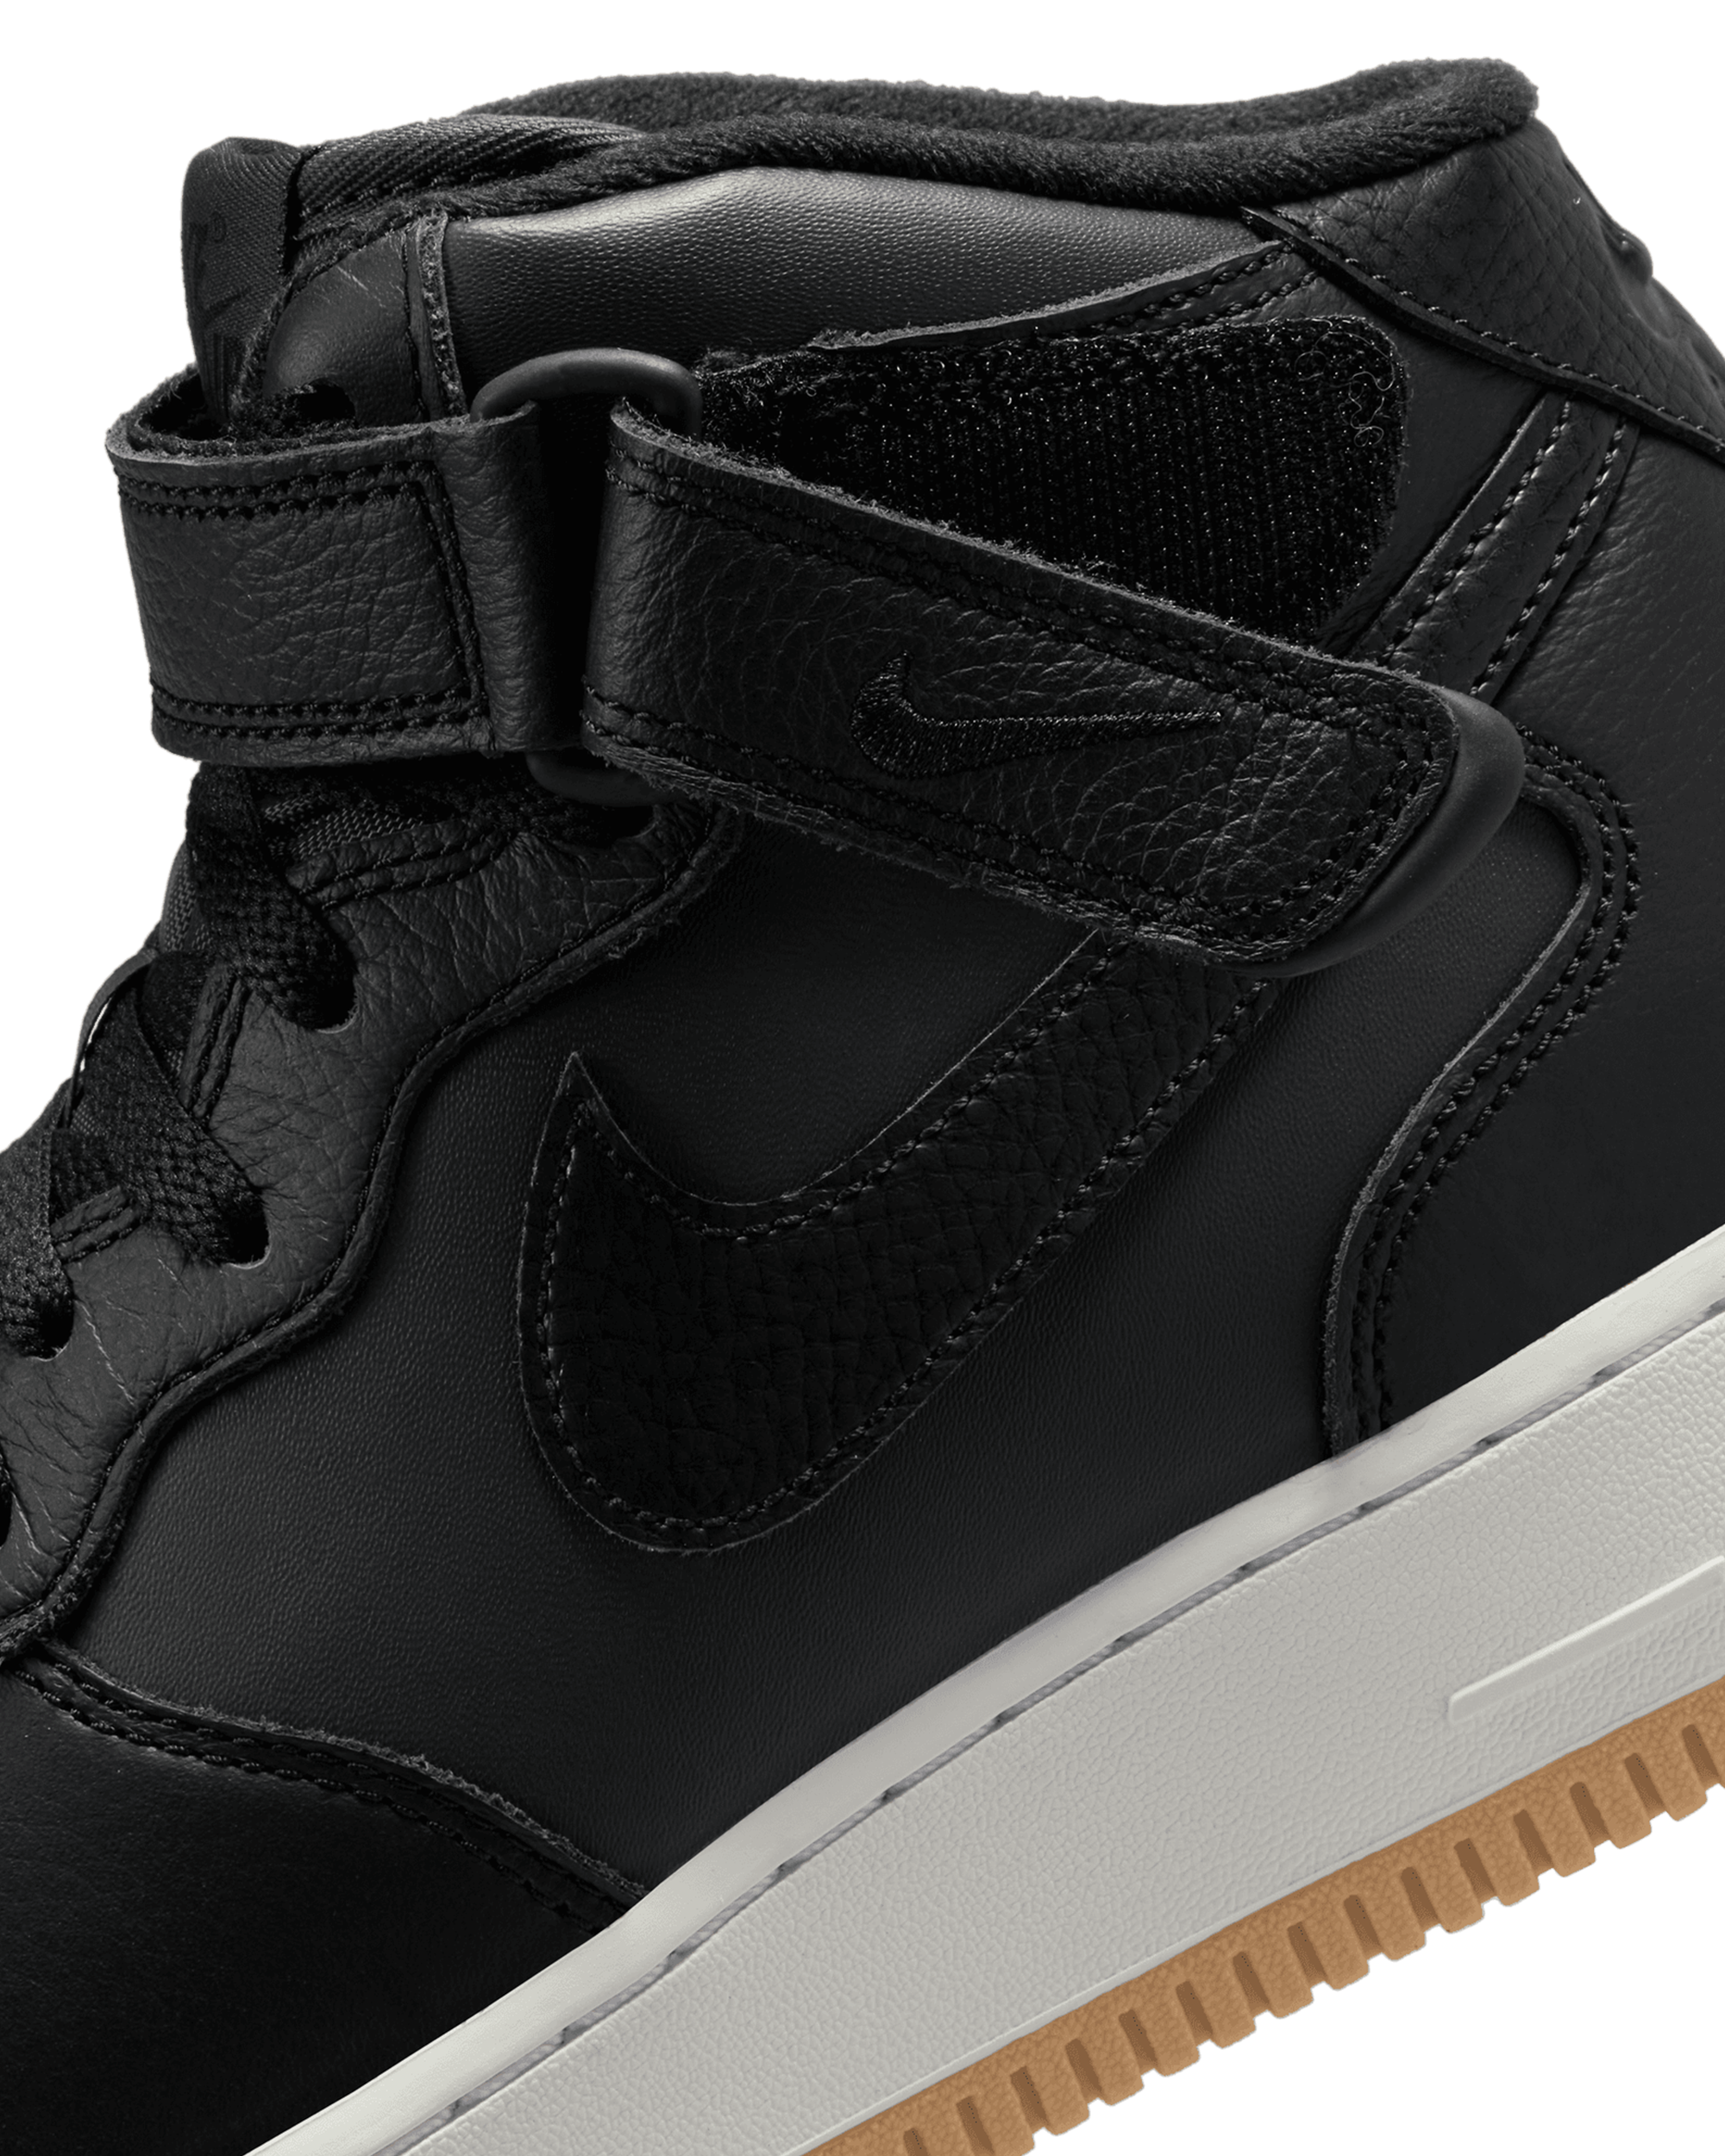 Air Force 1 Mid 07 LX - Anthracite / Black-Anthracite / Summit White